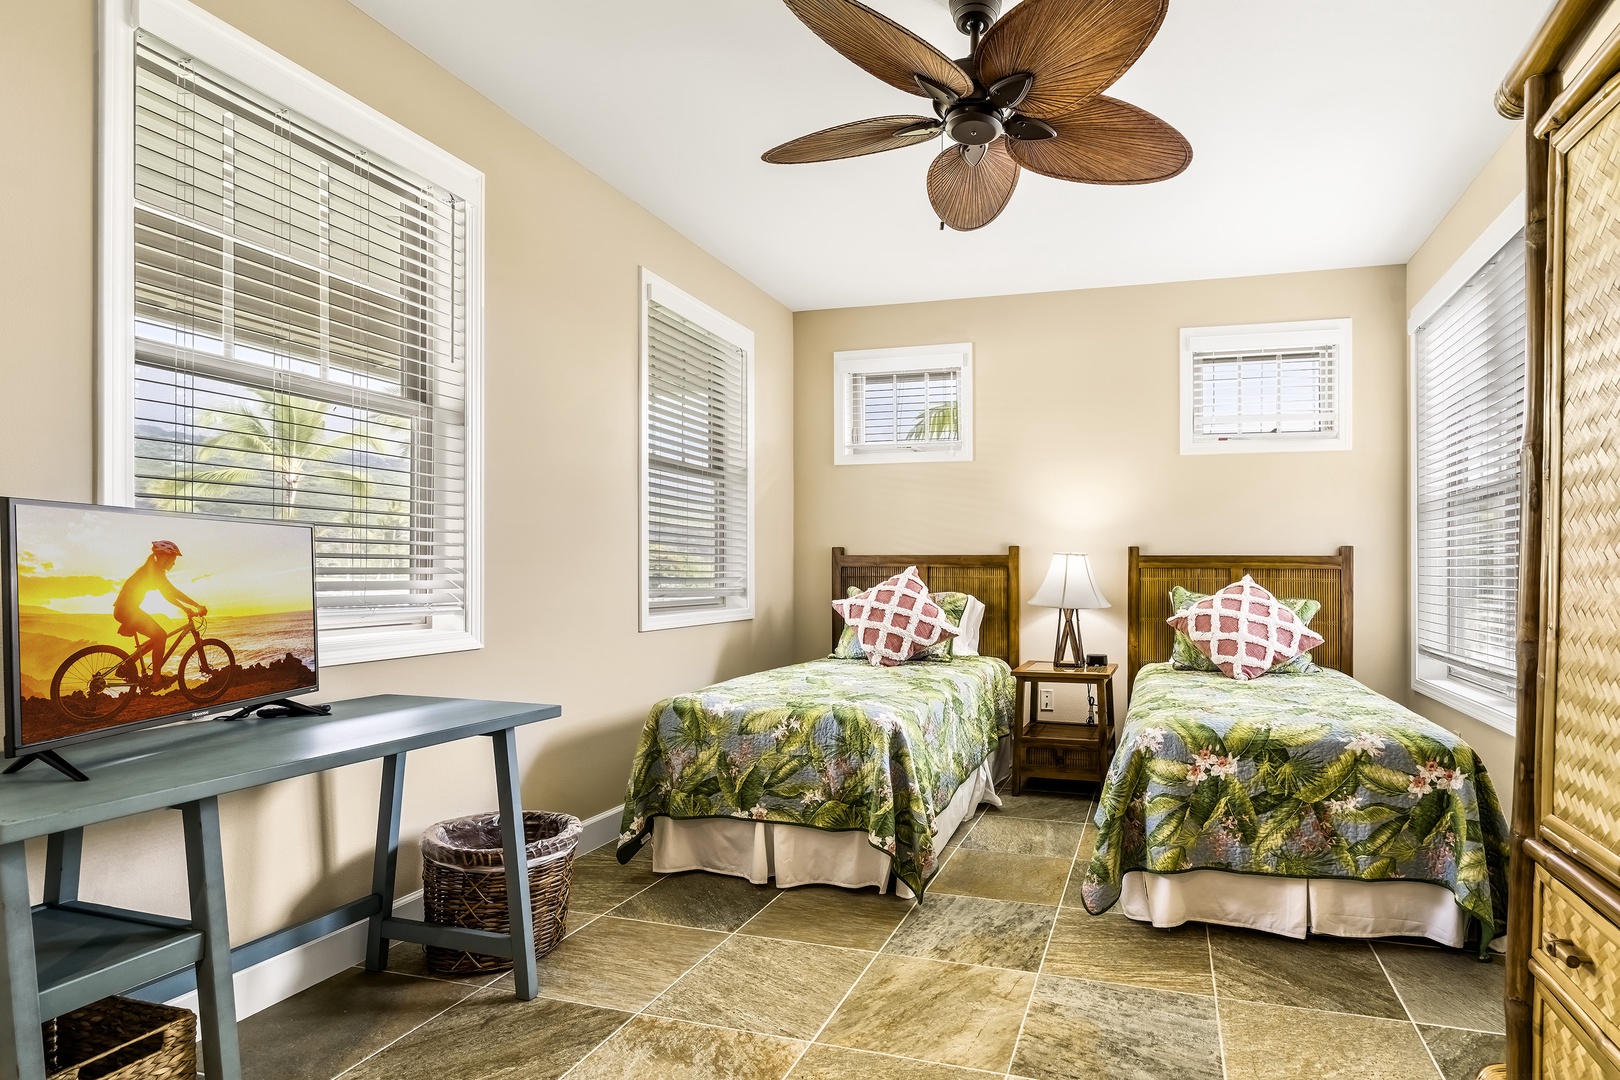 Kailua Kona Vacation Rentals, Golf Green - Downstairs bonus room equipped with 2 Twin beds